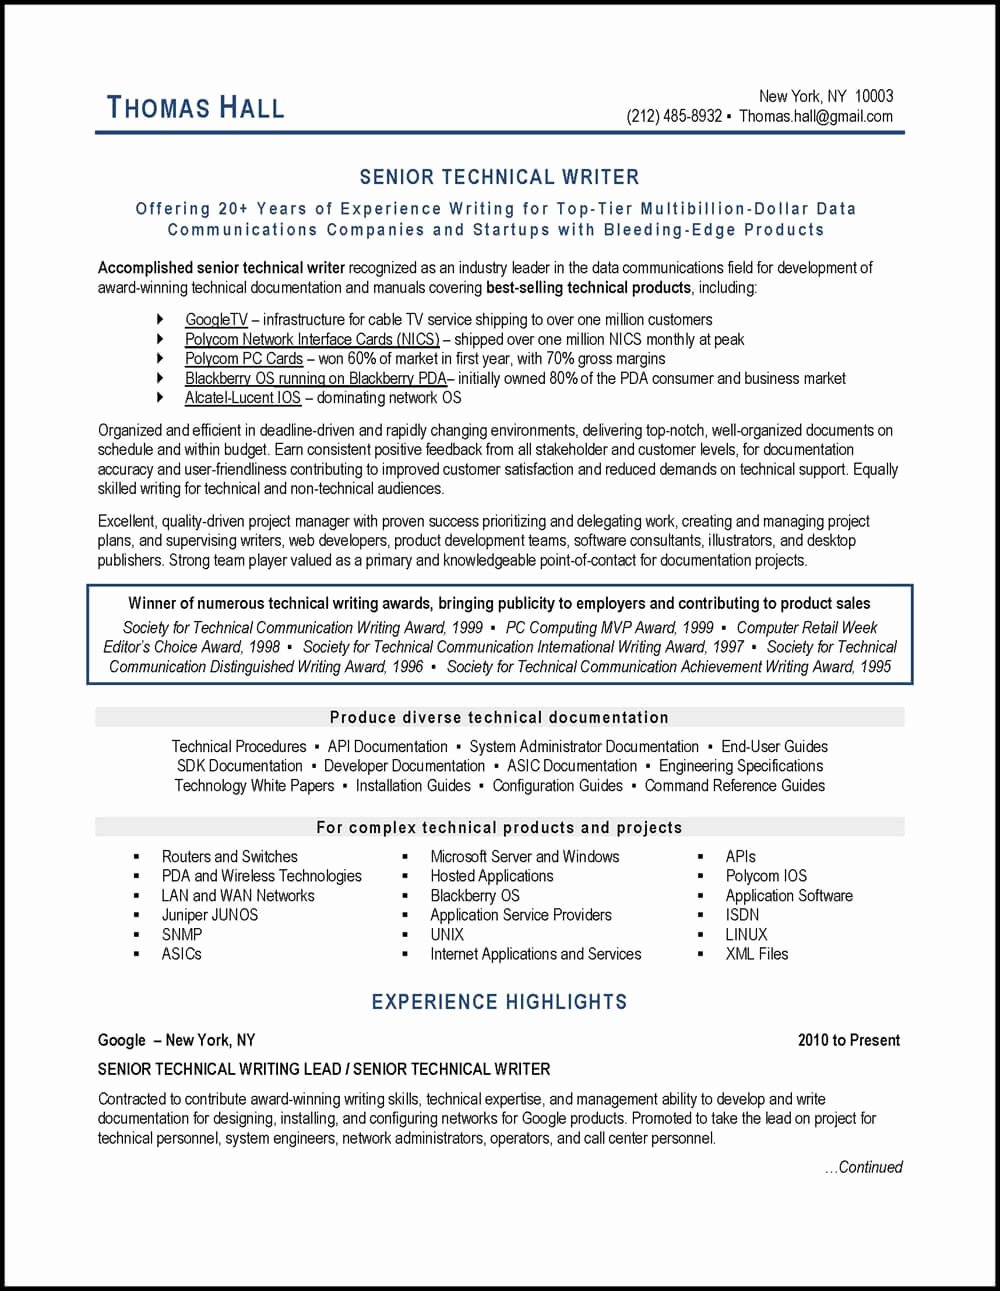 Technical Writer Resume Examples Awesome Technical Writer Resume Example and Expert Tips